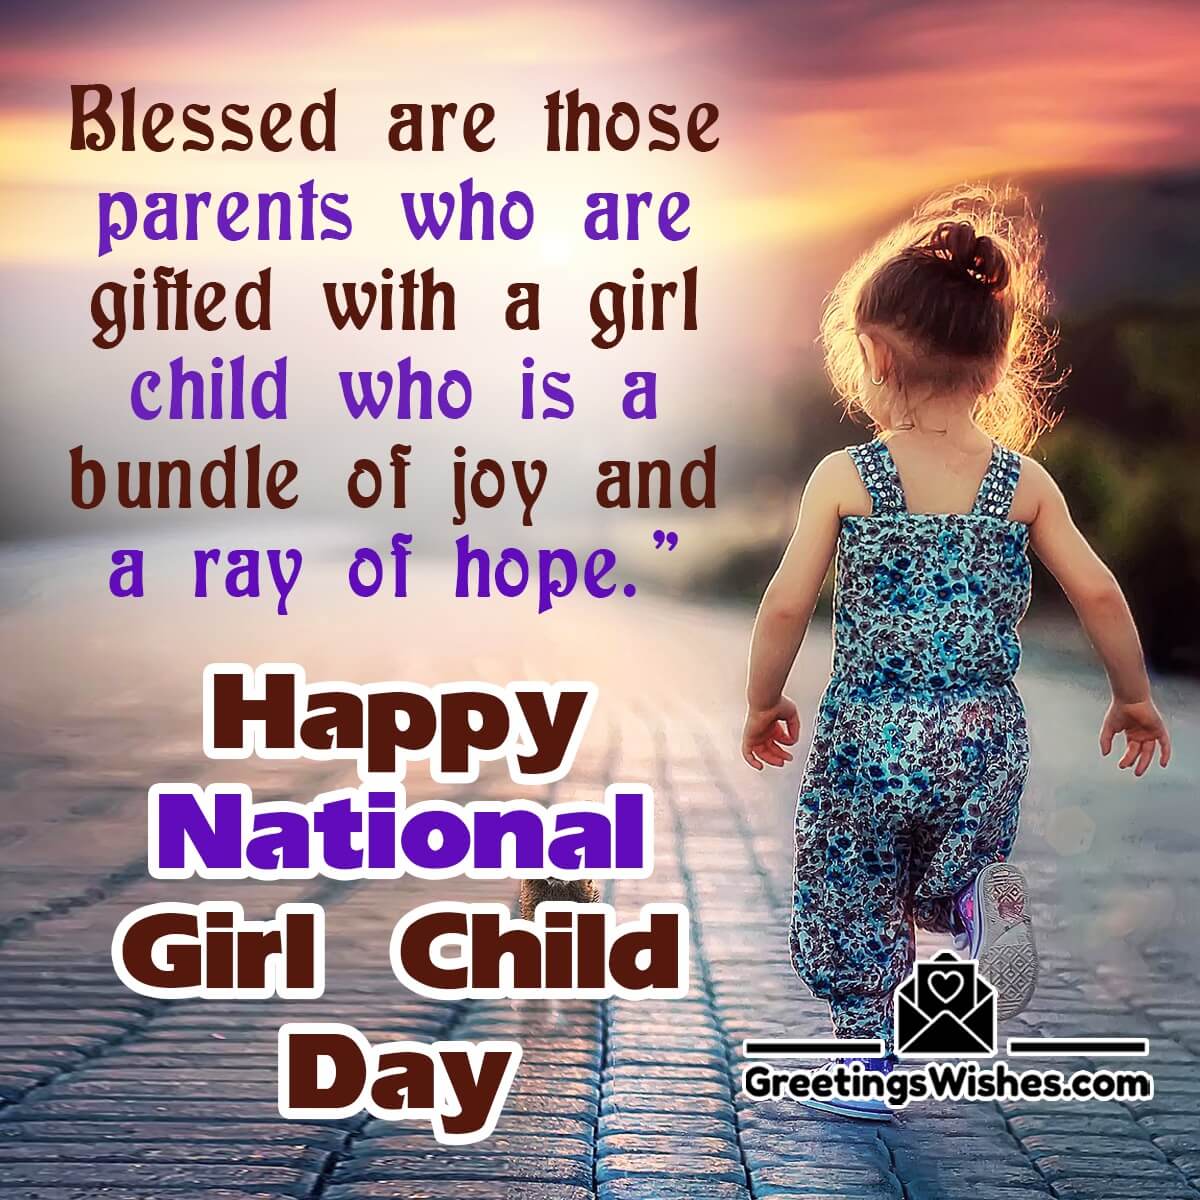 Happy National Girl Child Day Blessing